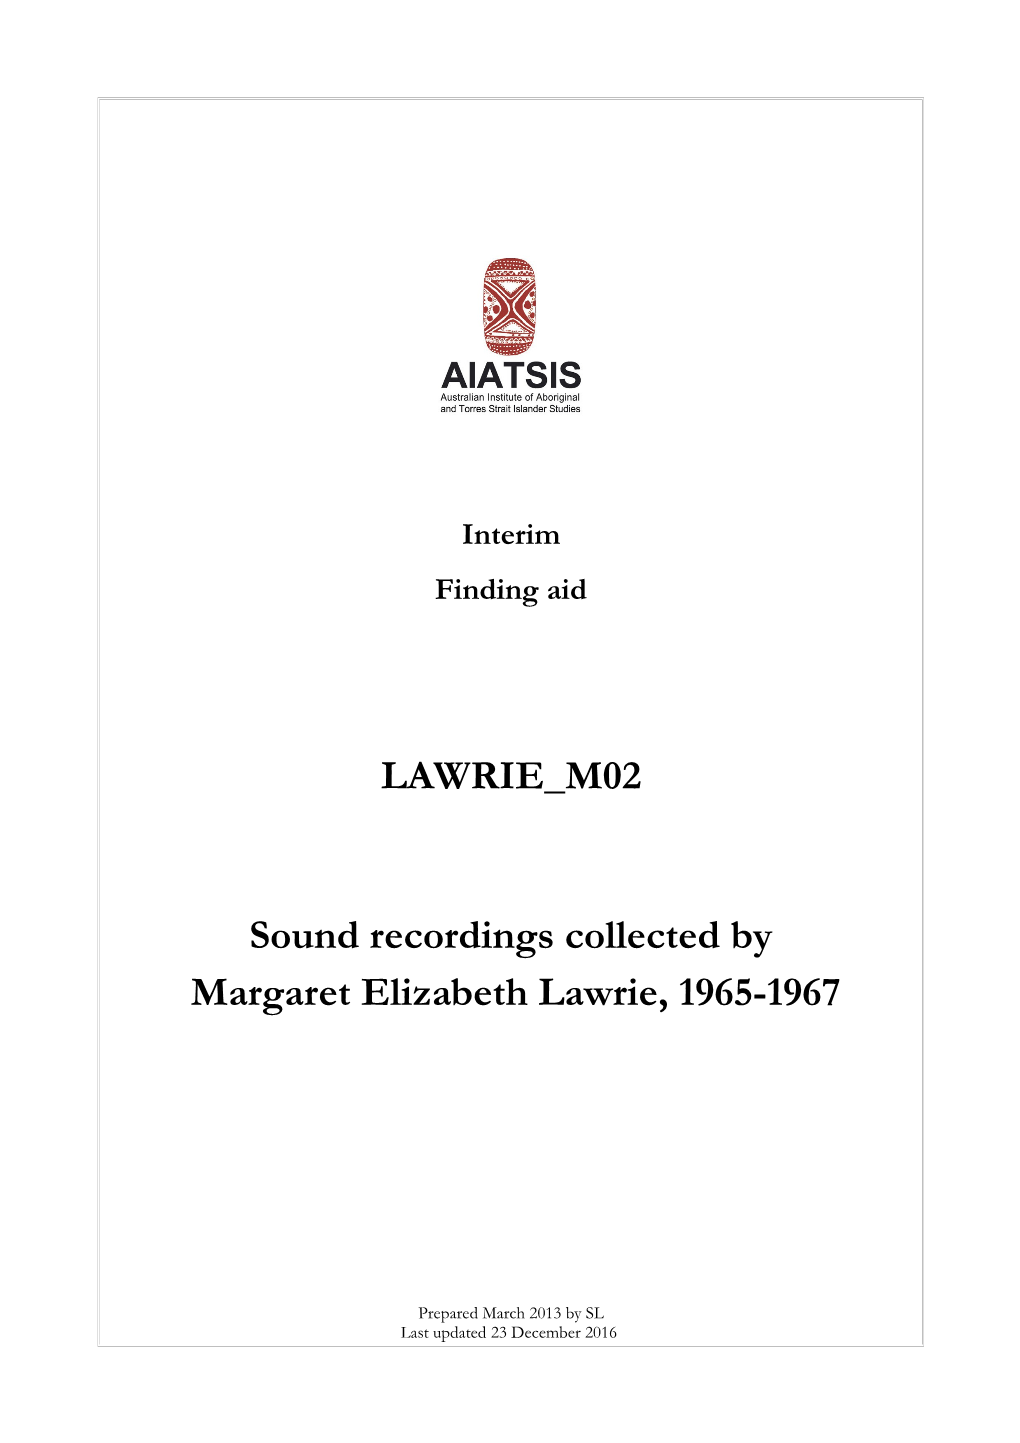 Guide to Sound Recordings Collected by Margaret Elizabeth Lawrie, 1965